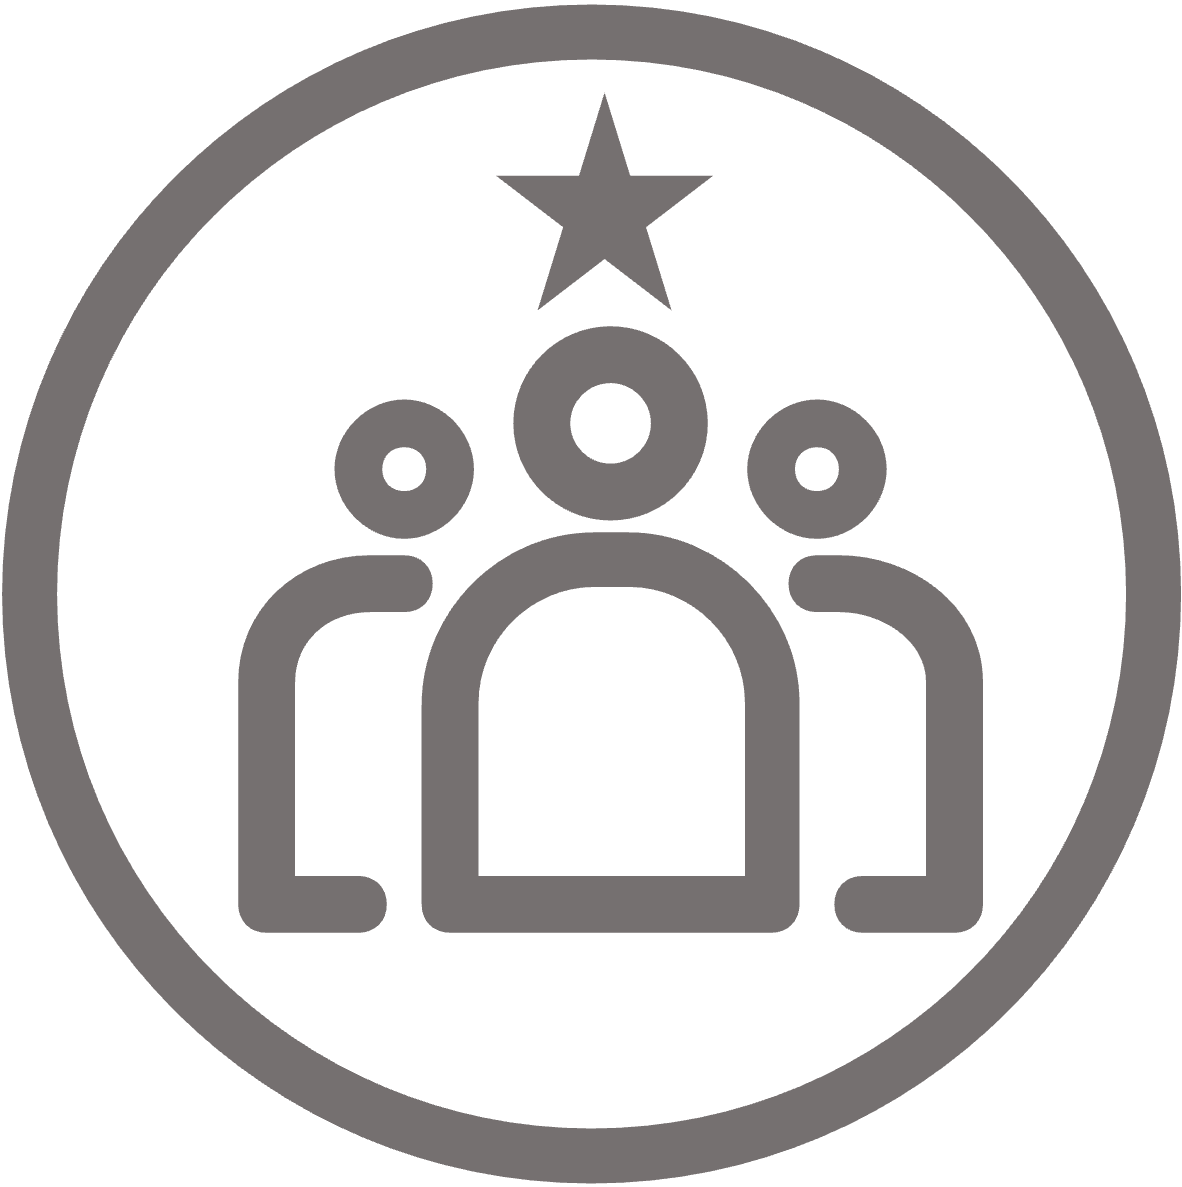 Circular icon of three people with star above center person